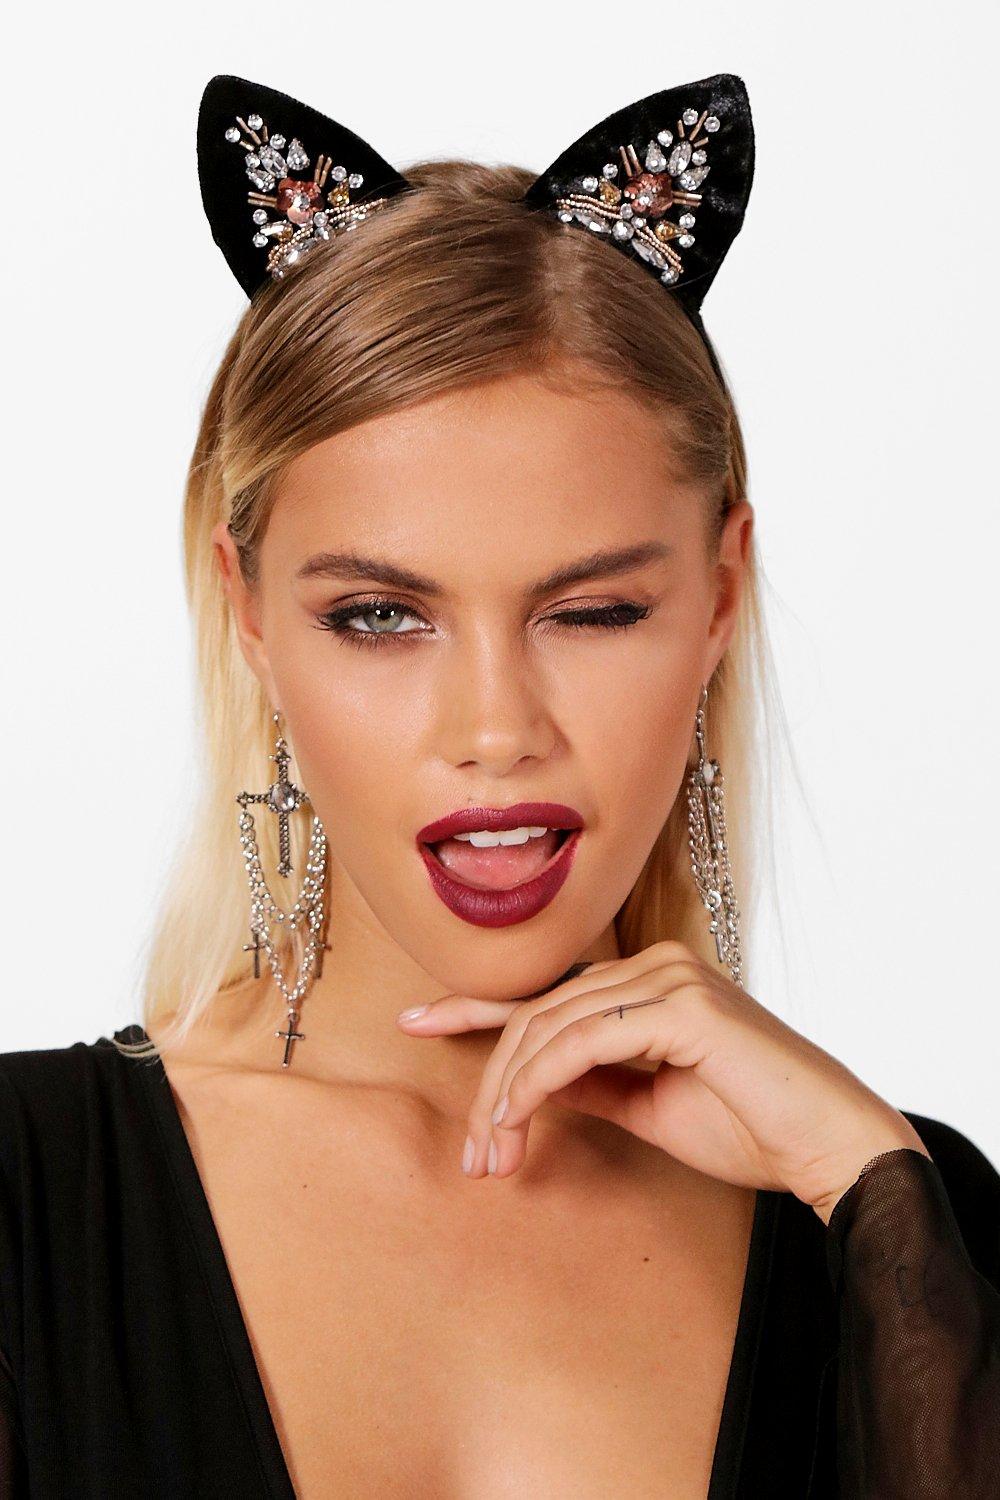 Embellished Cat Ears For Halloween